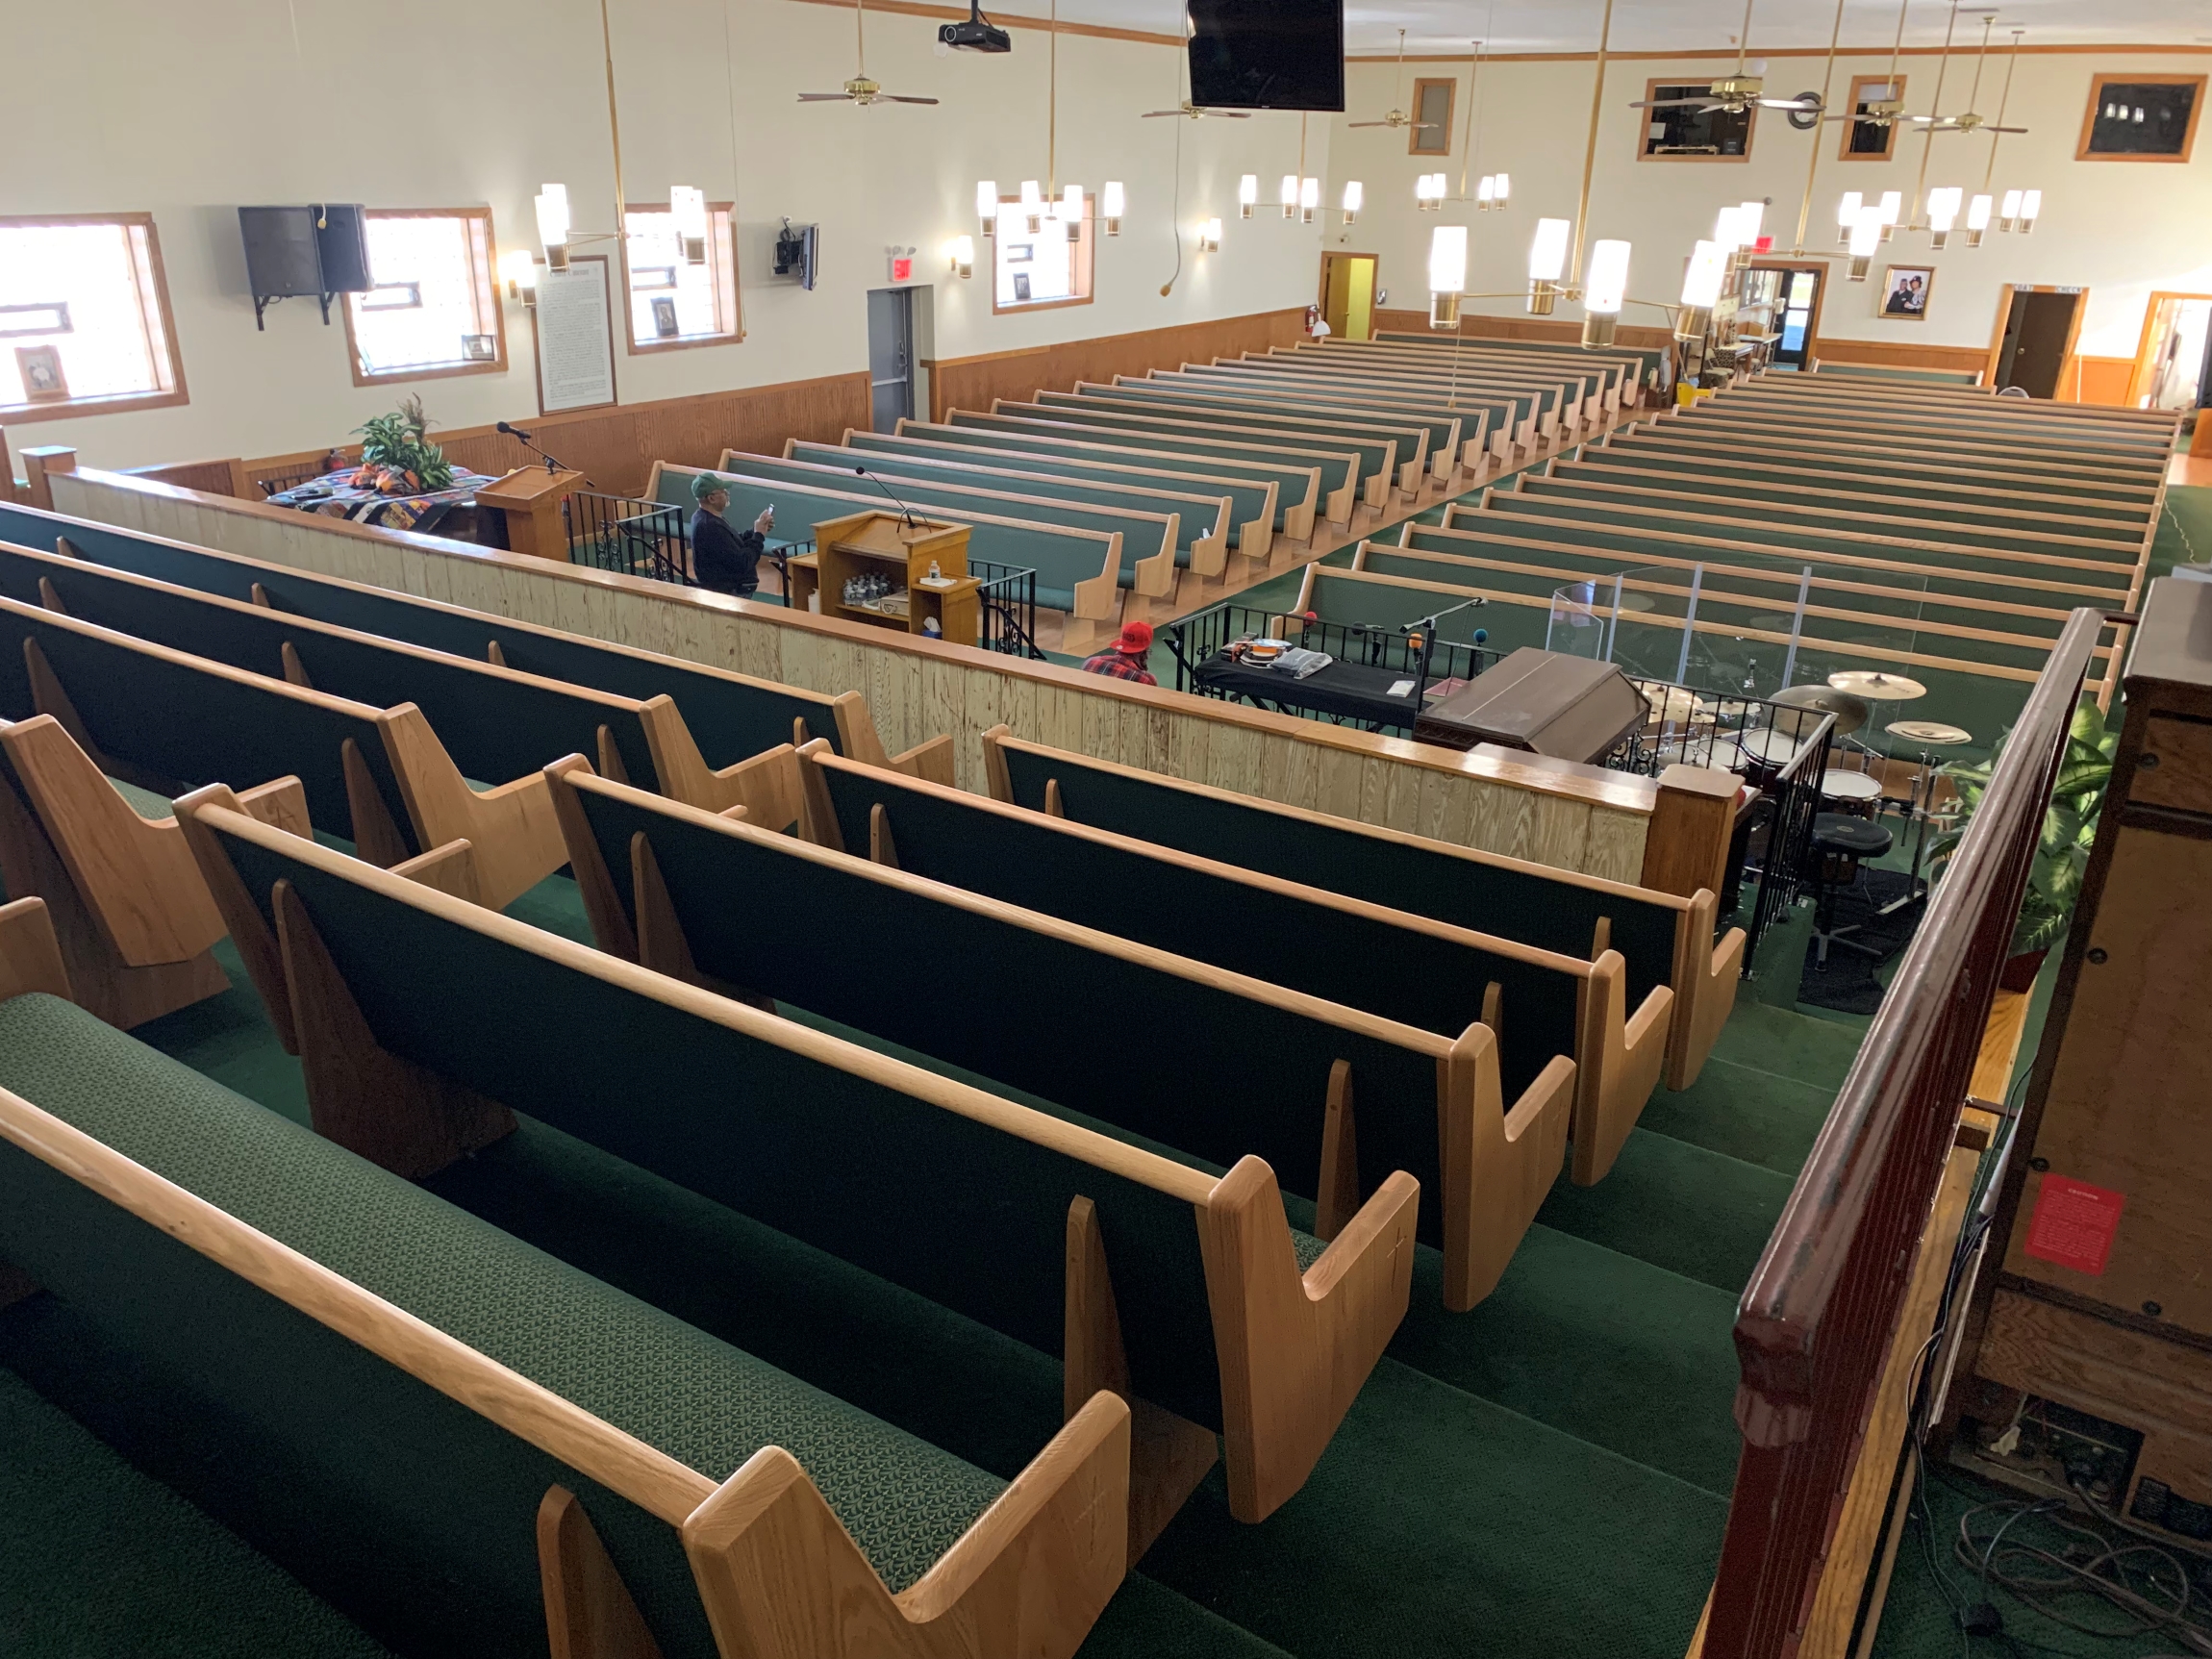 New Church pews installed by Woods Church Interiors at New Faith Baptist Church in Chicago, Illinois - 10